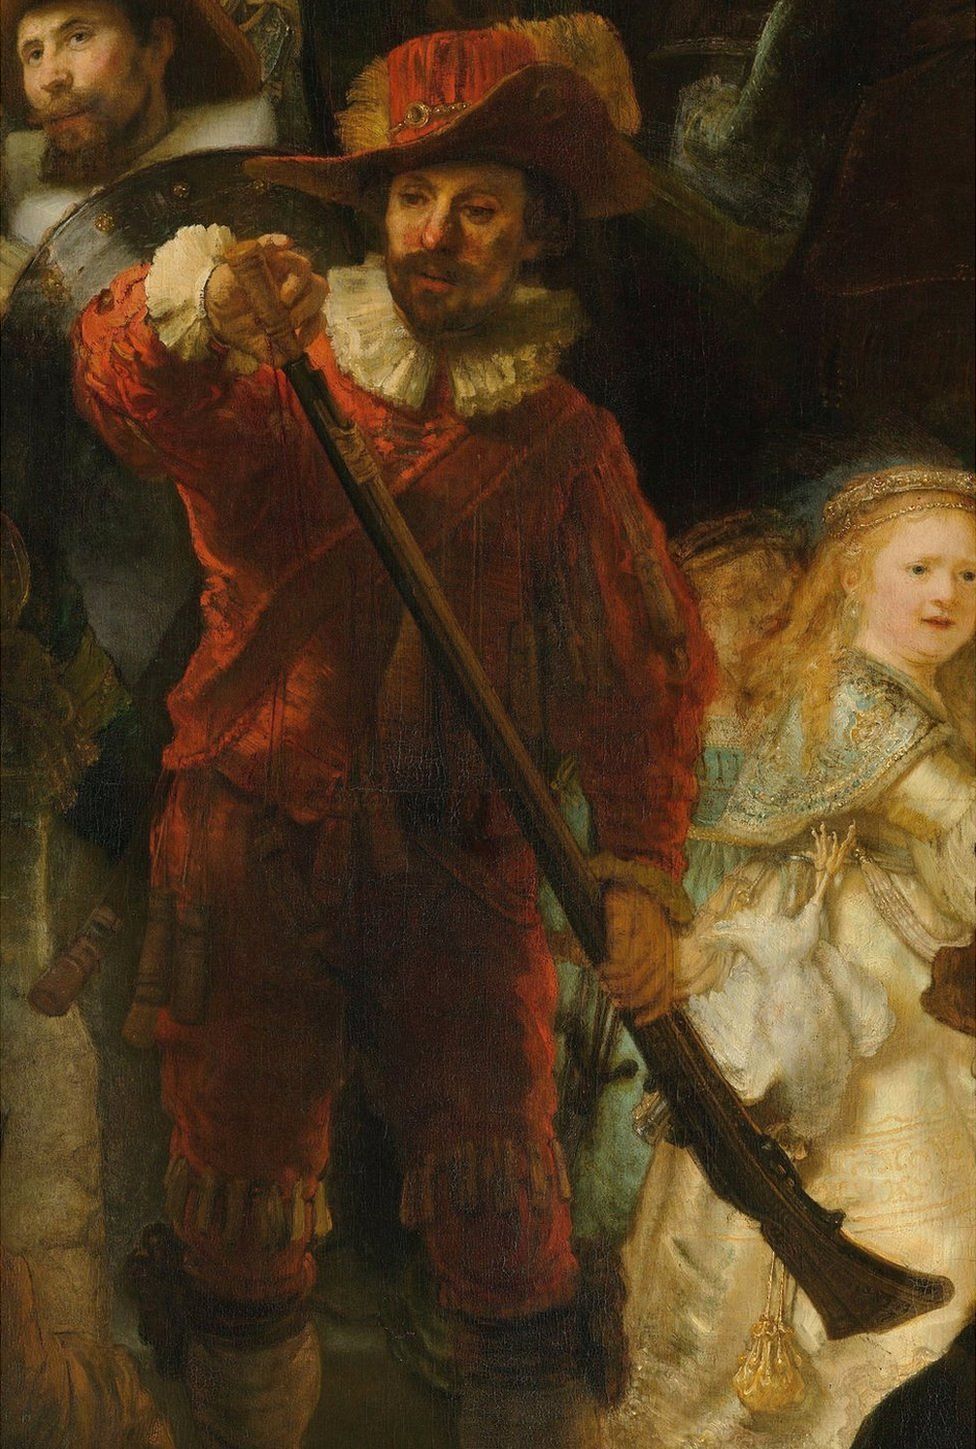 Musketeer dressed in red with white collar and cuffs, is loading his musket with gunpowder, and young girl in gold dress